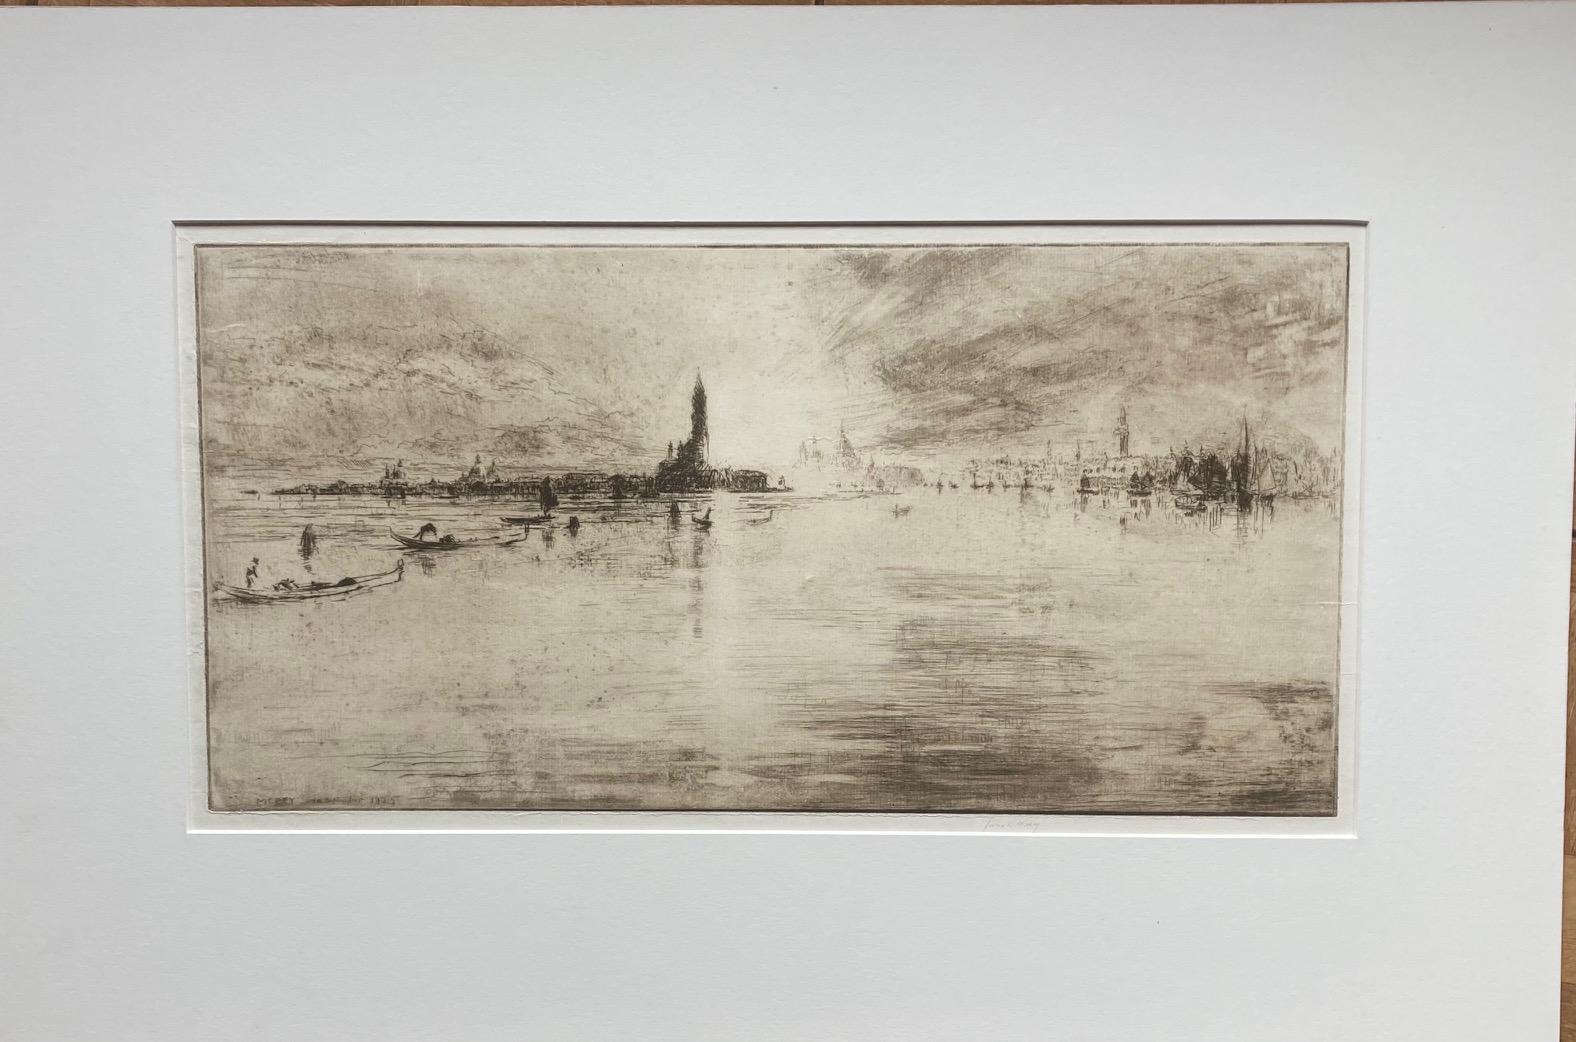 September Sunset. 1928. Etching. Hardie/Carter 241. 8 7/8 x 17 3/4 (sheet 12 1/4 X 20 7/16). Edition 80, #50.  A rich impression with subtle tonal wiping. Printed on white laid paper with full margins. Signed in slightly in that has faded  Housed in